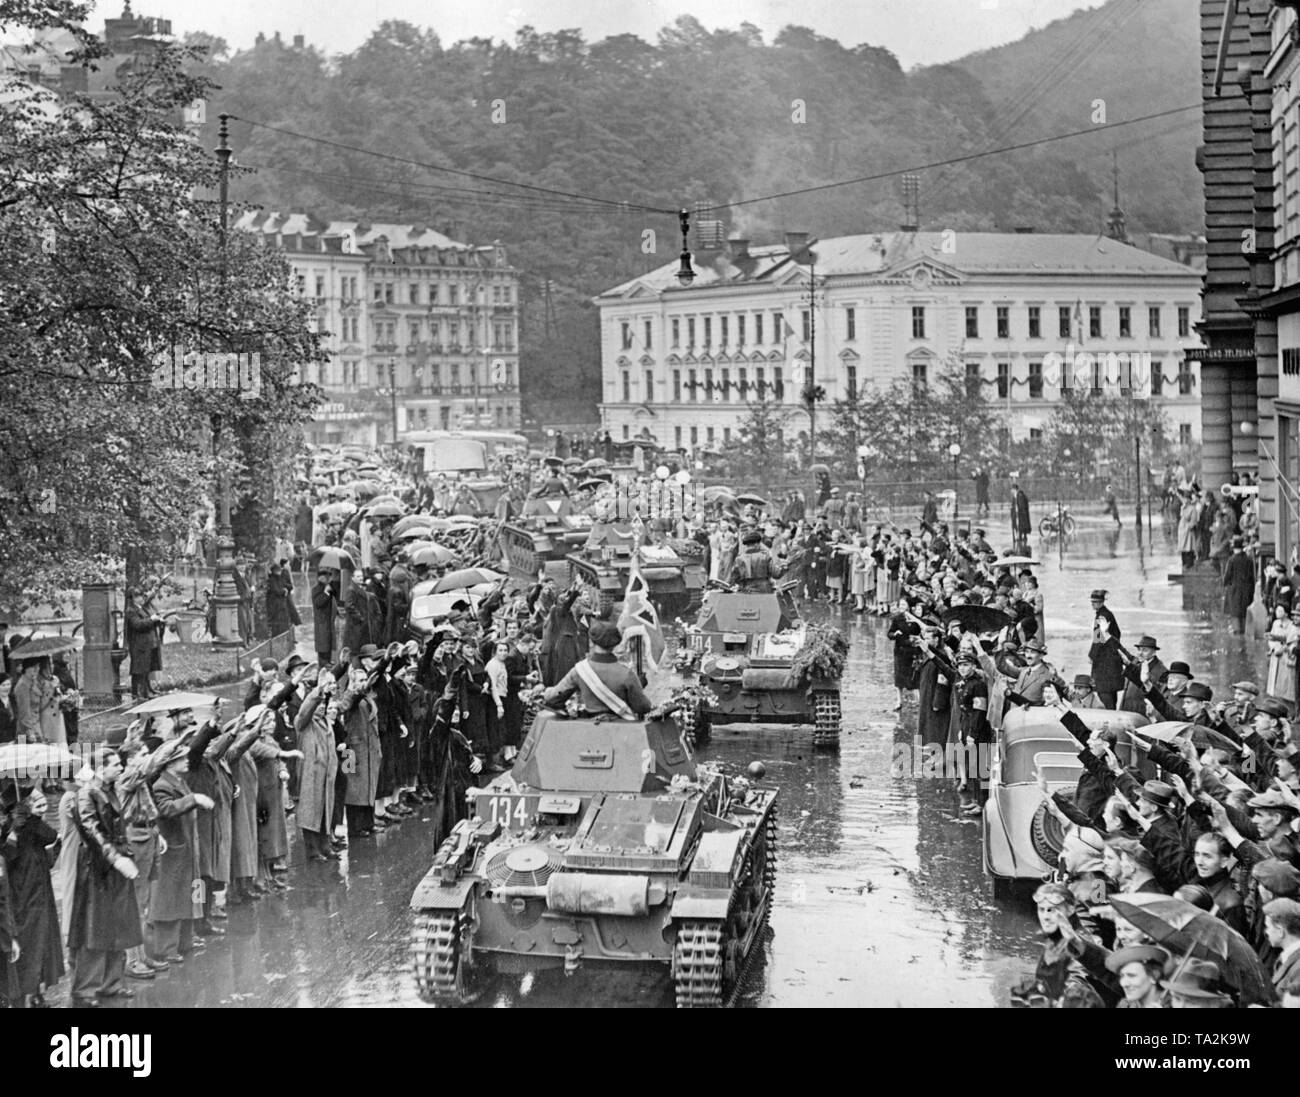 An armored regiment of the Wehrmacht drives into Karlsbad (today Karlovy Vary) with its Panzer I on October 4, 1938. The soldiers are welcomed by cheering people. Stock Photo